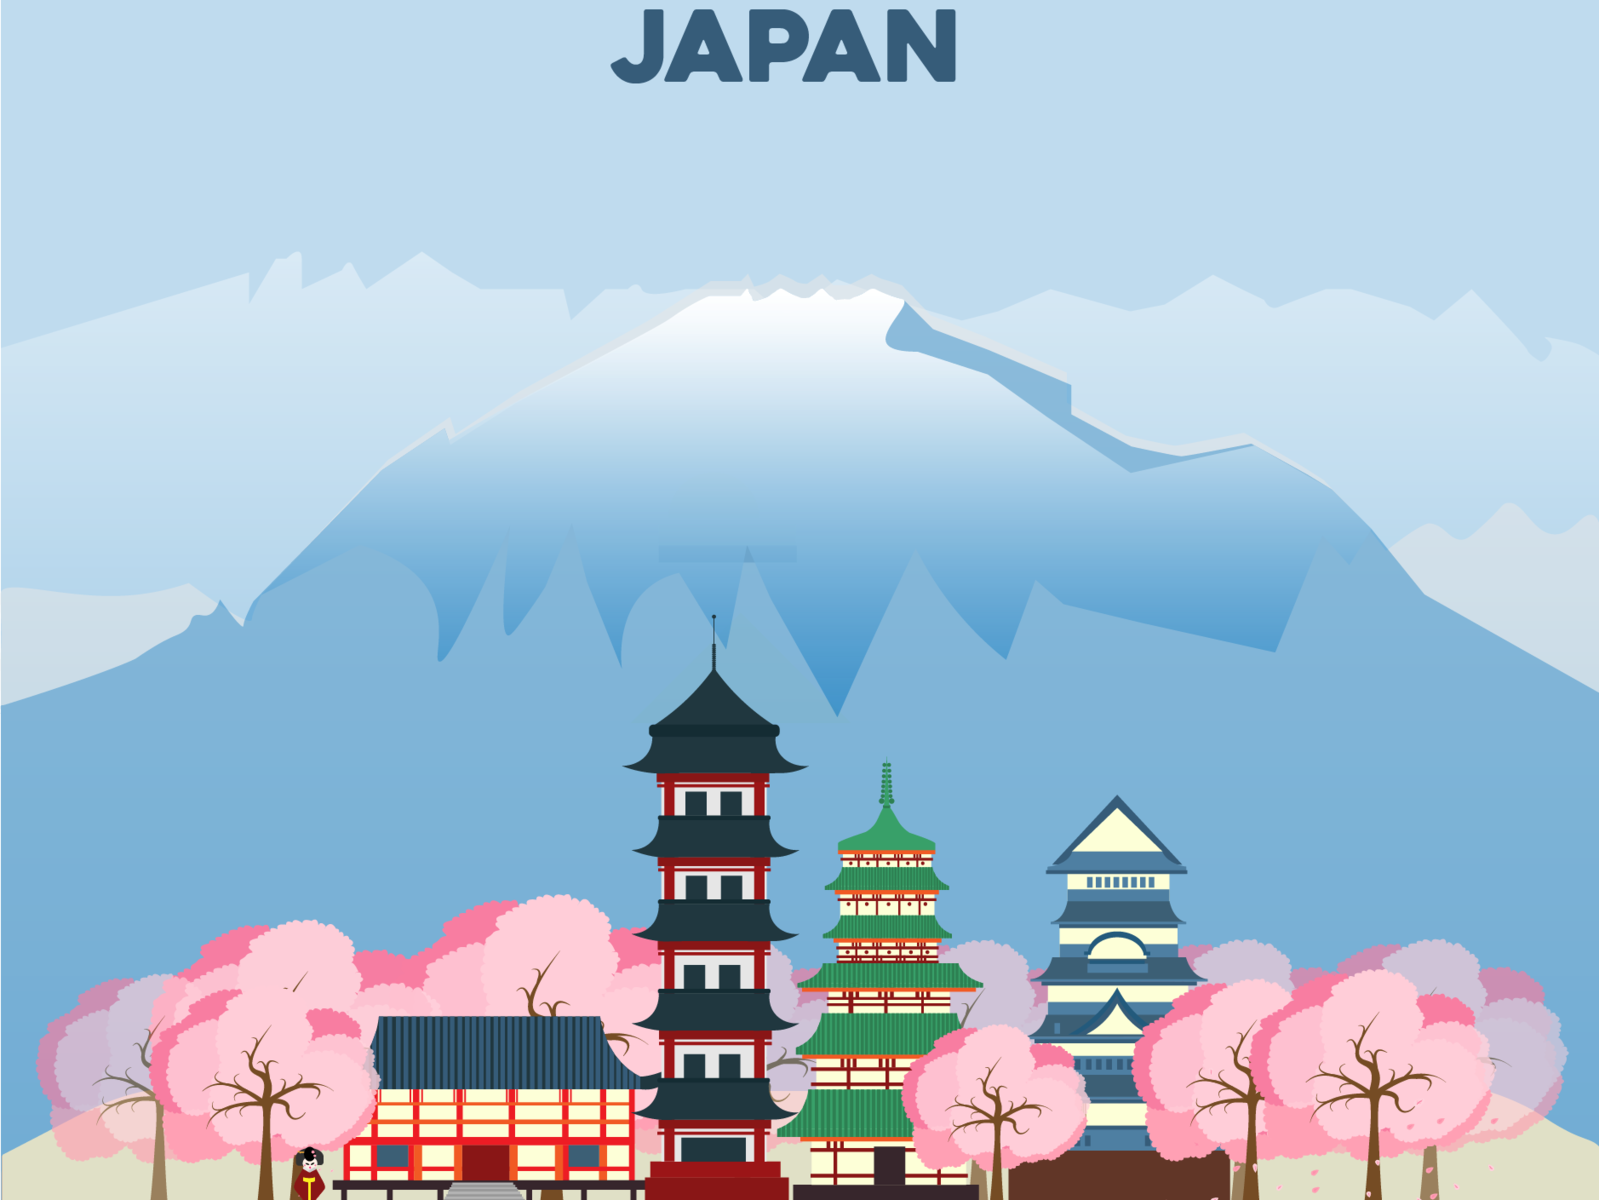 Japan by Rencel Vocales on Dribbble